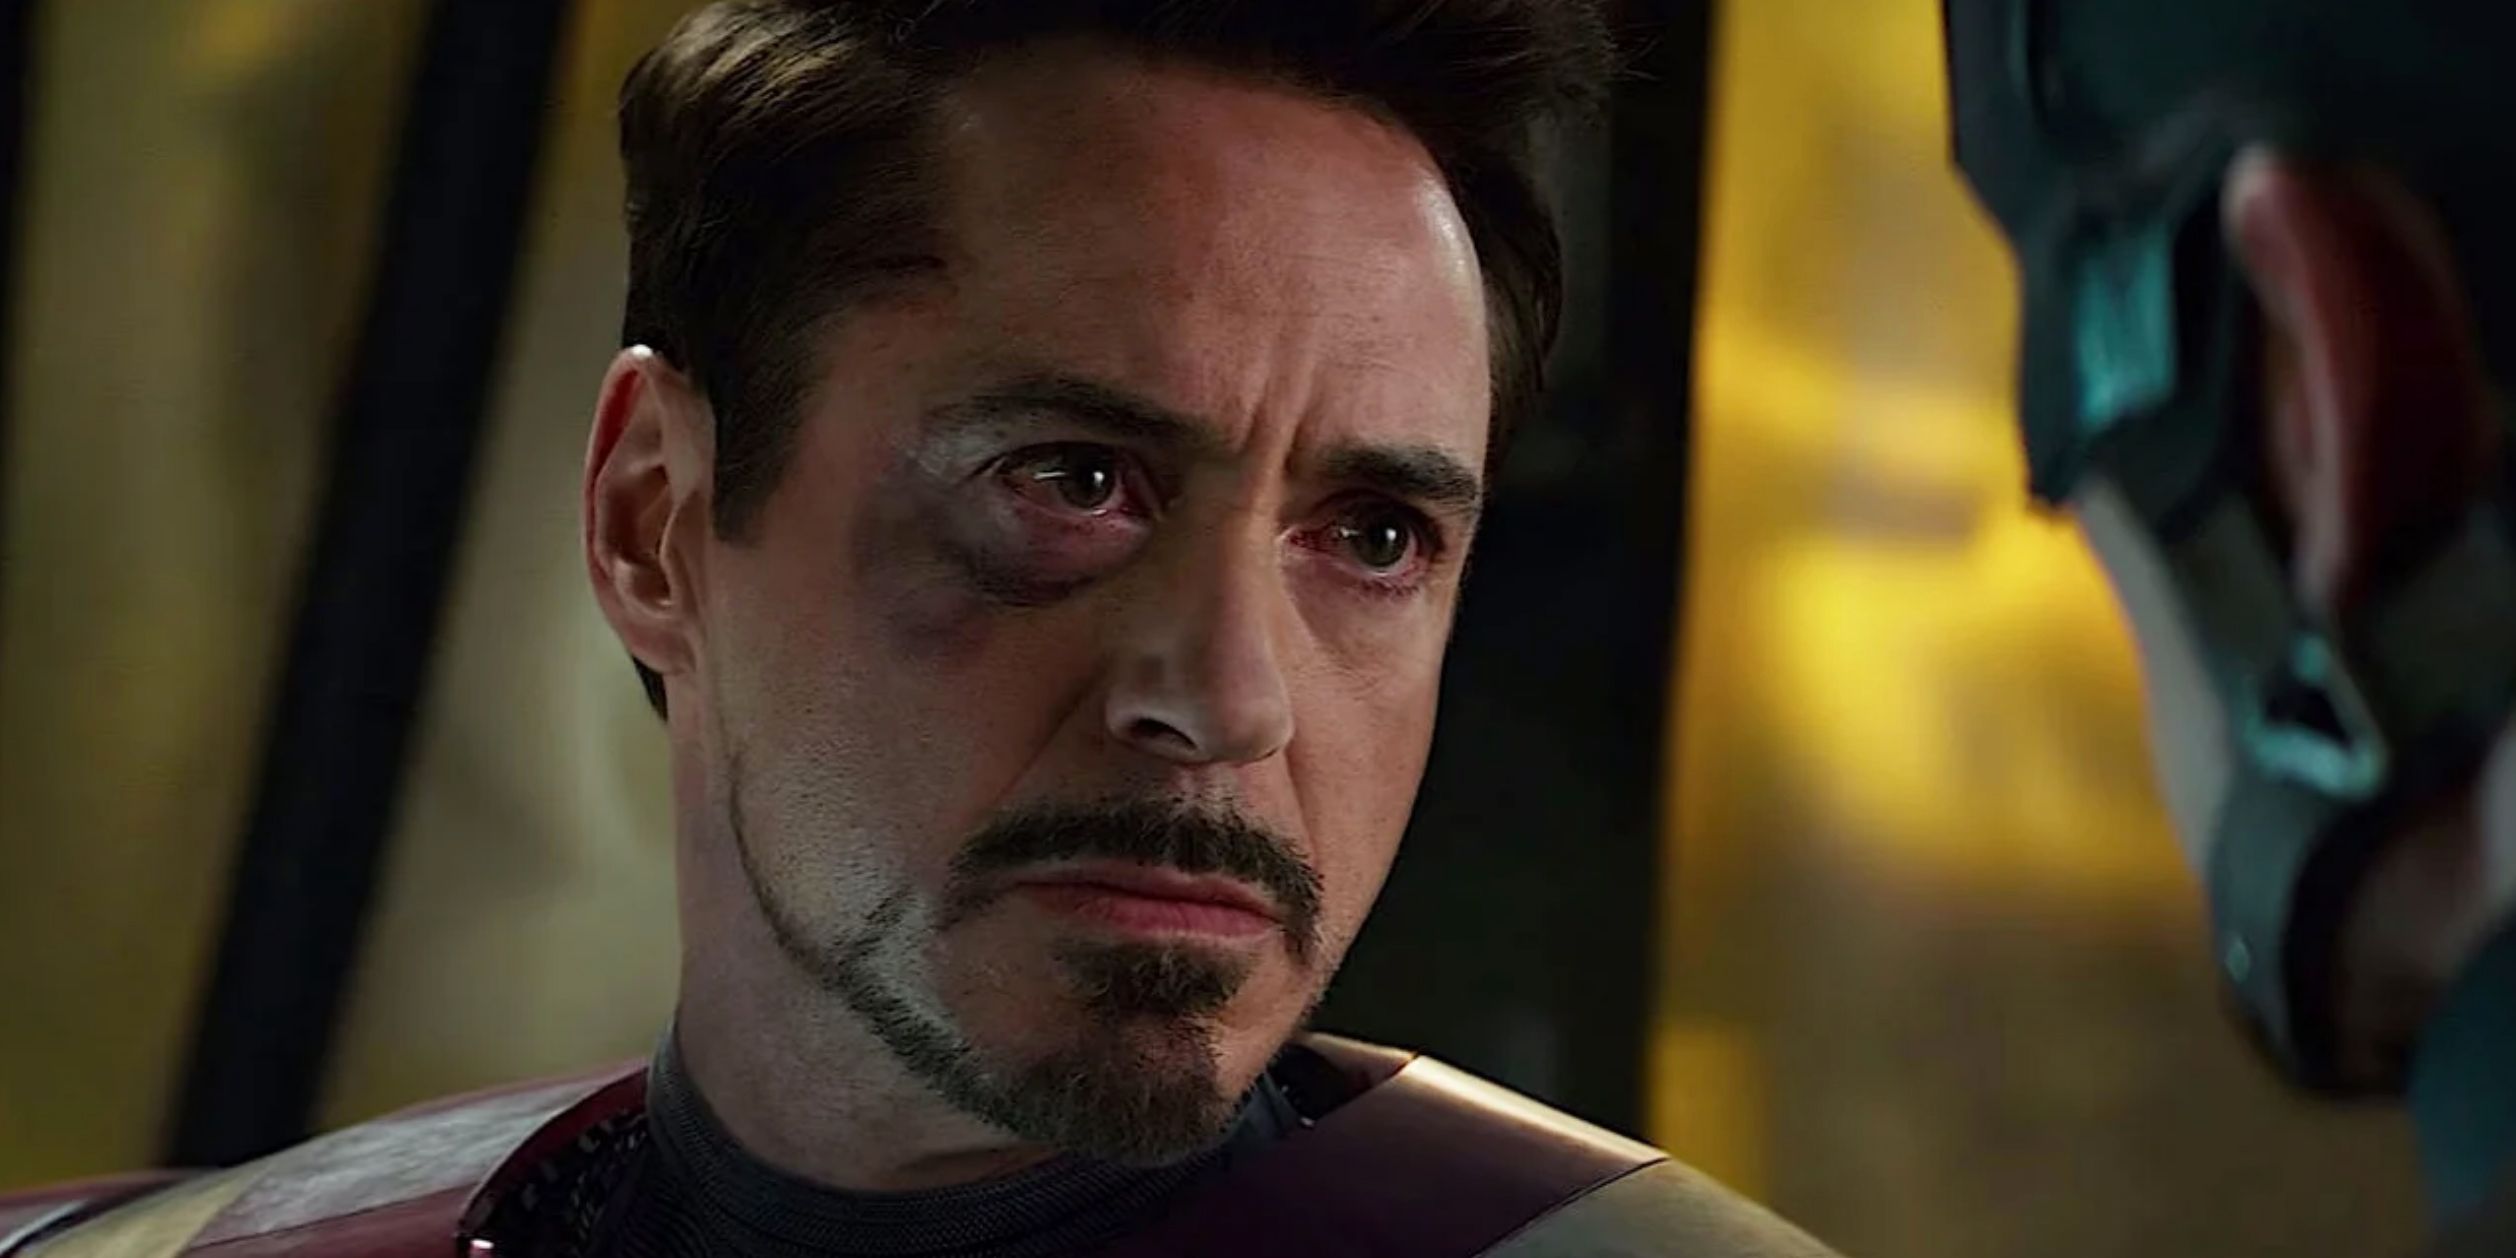 Tony looking angry at Steve Rogers in Captain America: Civil War